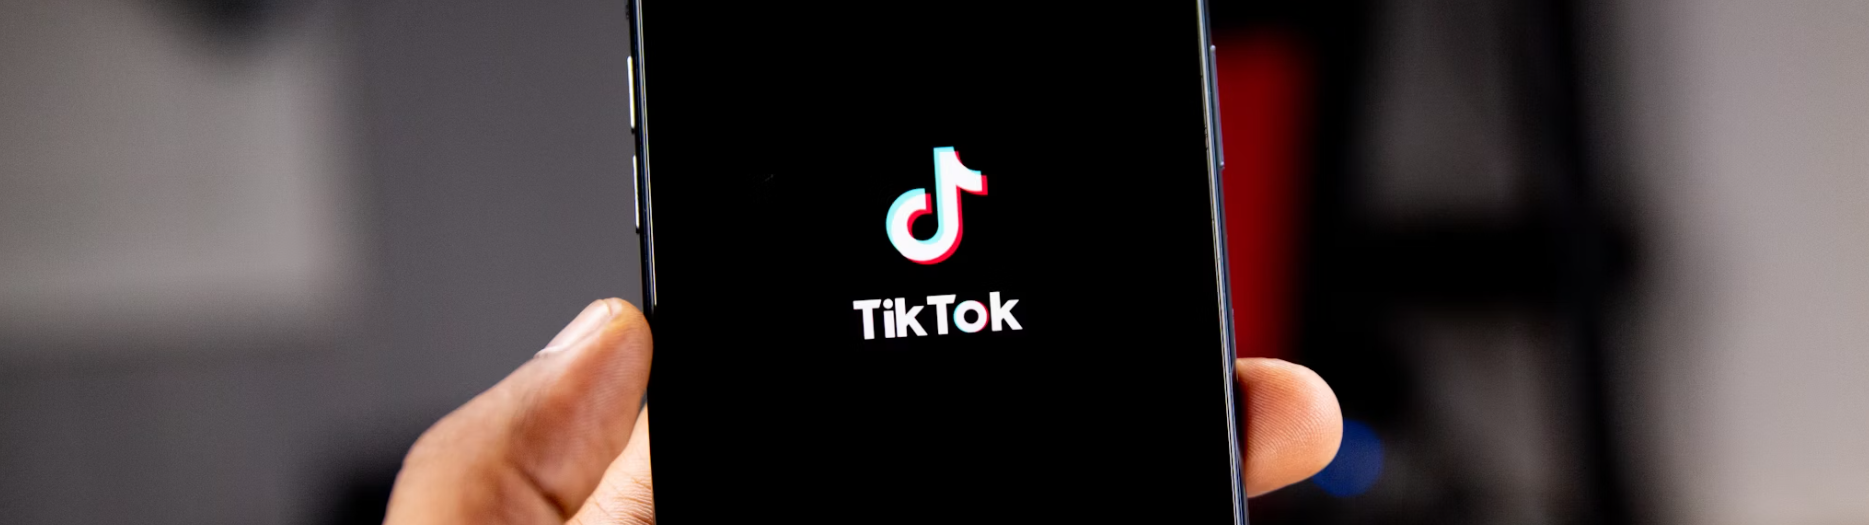 The History Of The TikTok Logo and Brand